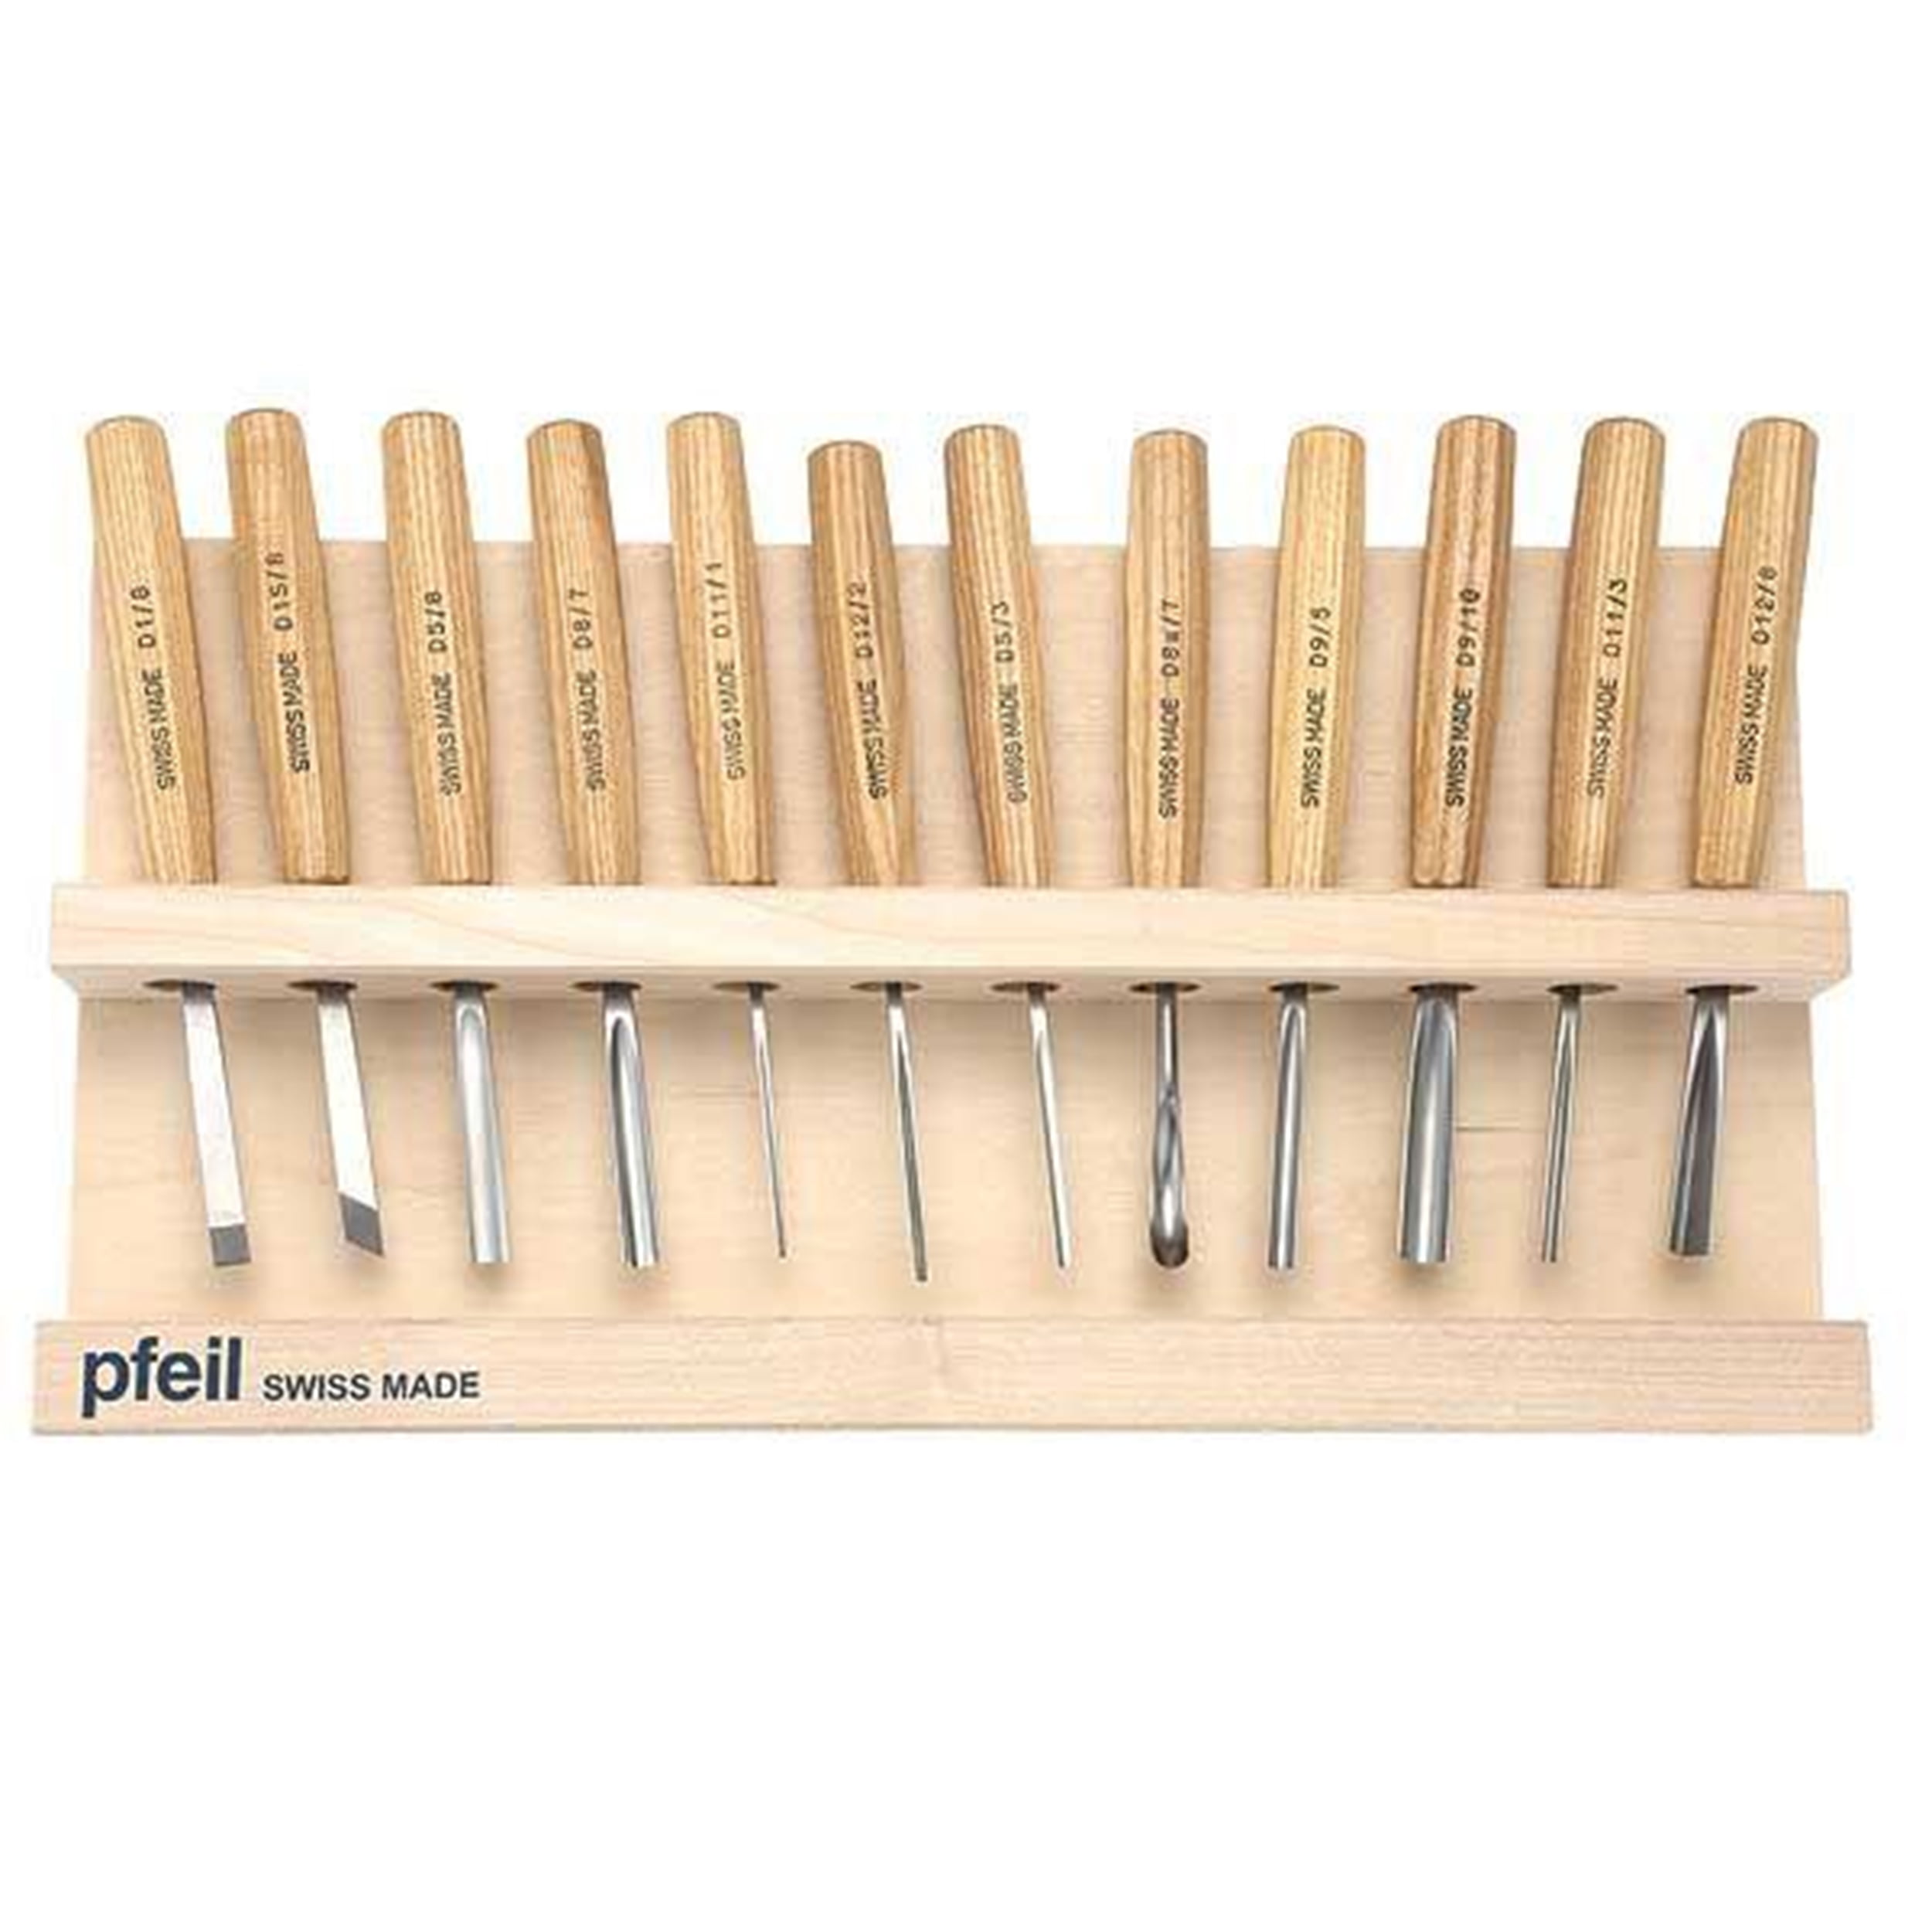 Pfeil Swiss Made Carving Tools